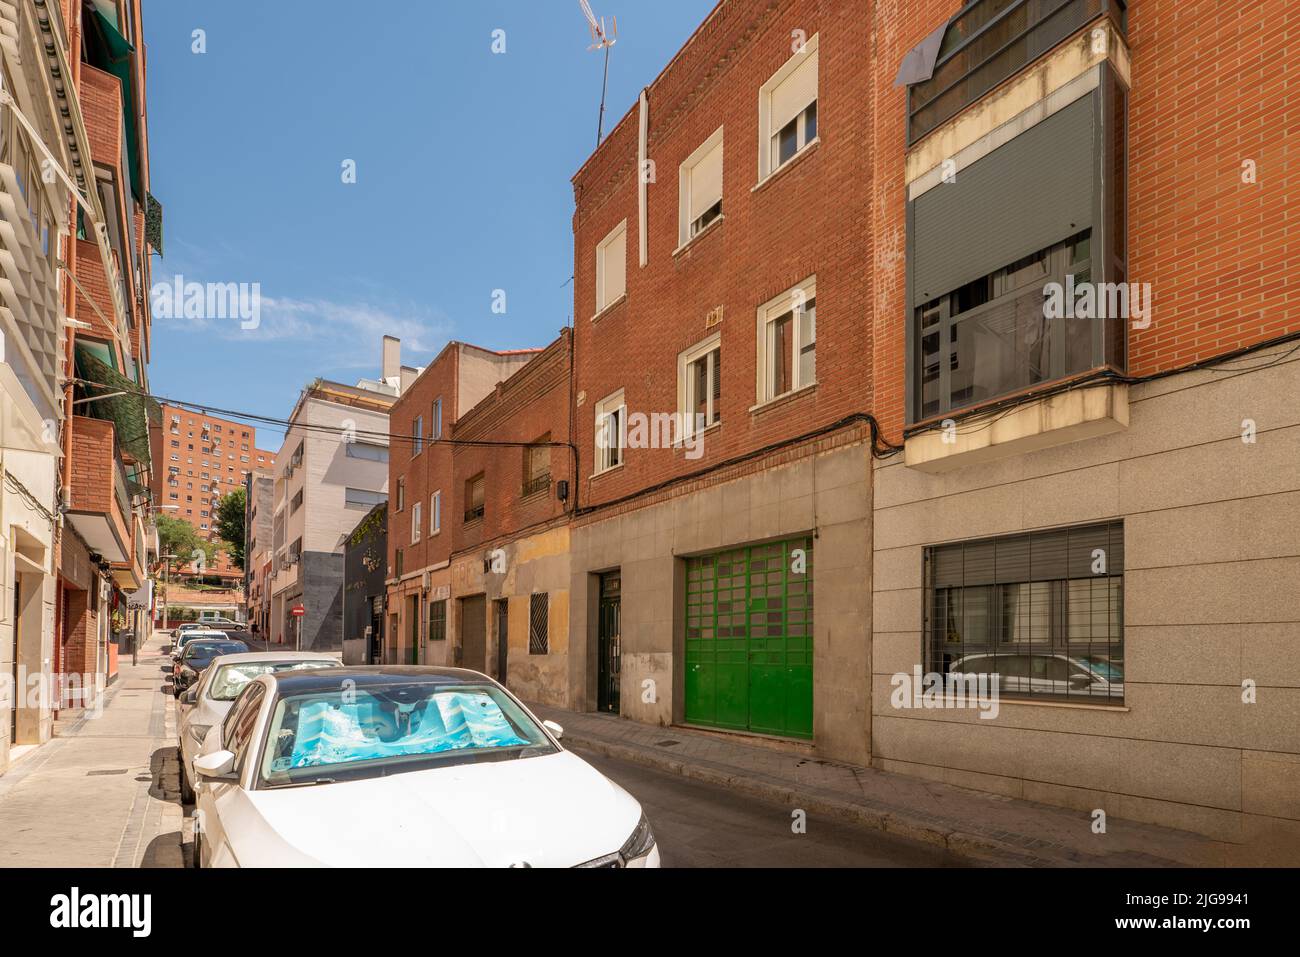 Facade of residential buildings in a narrow street full of parked cars and nice blue sky day Stock Photo